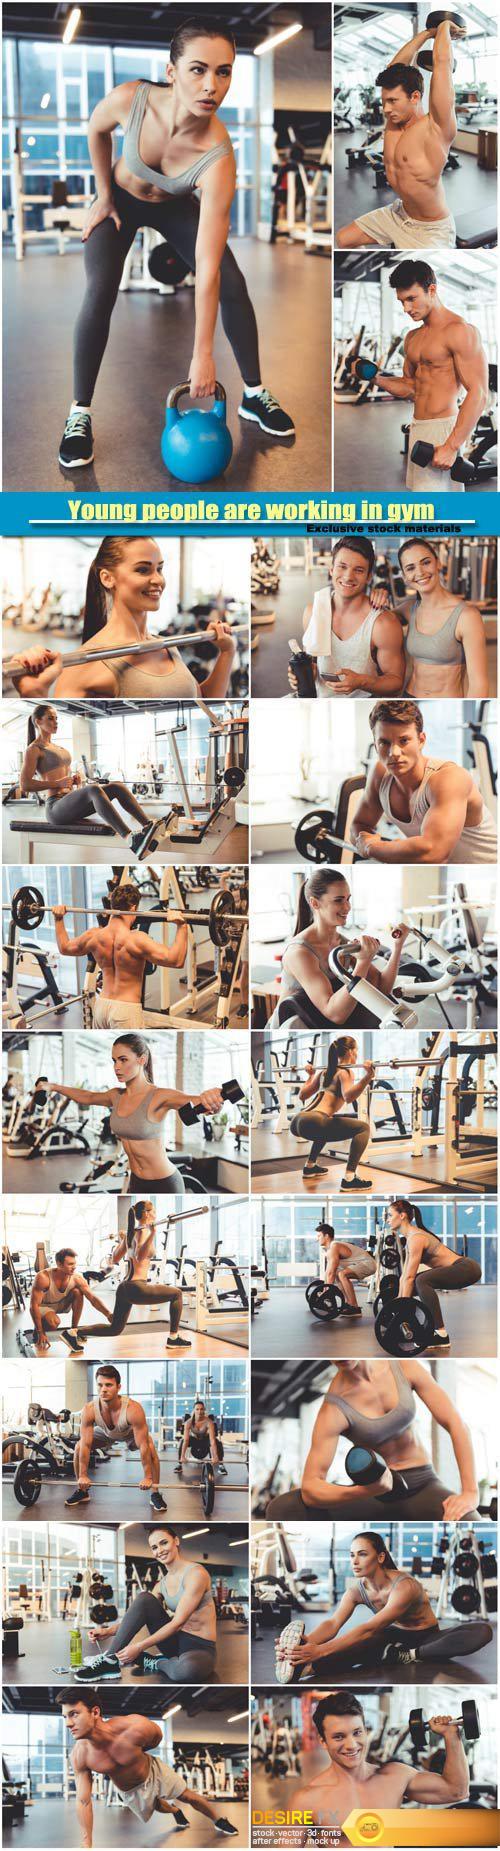 Attractive young people are working in gym